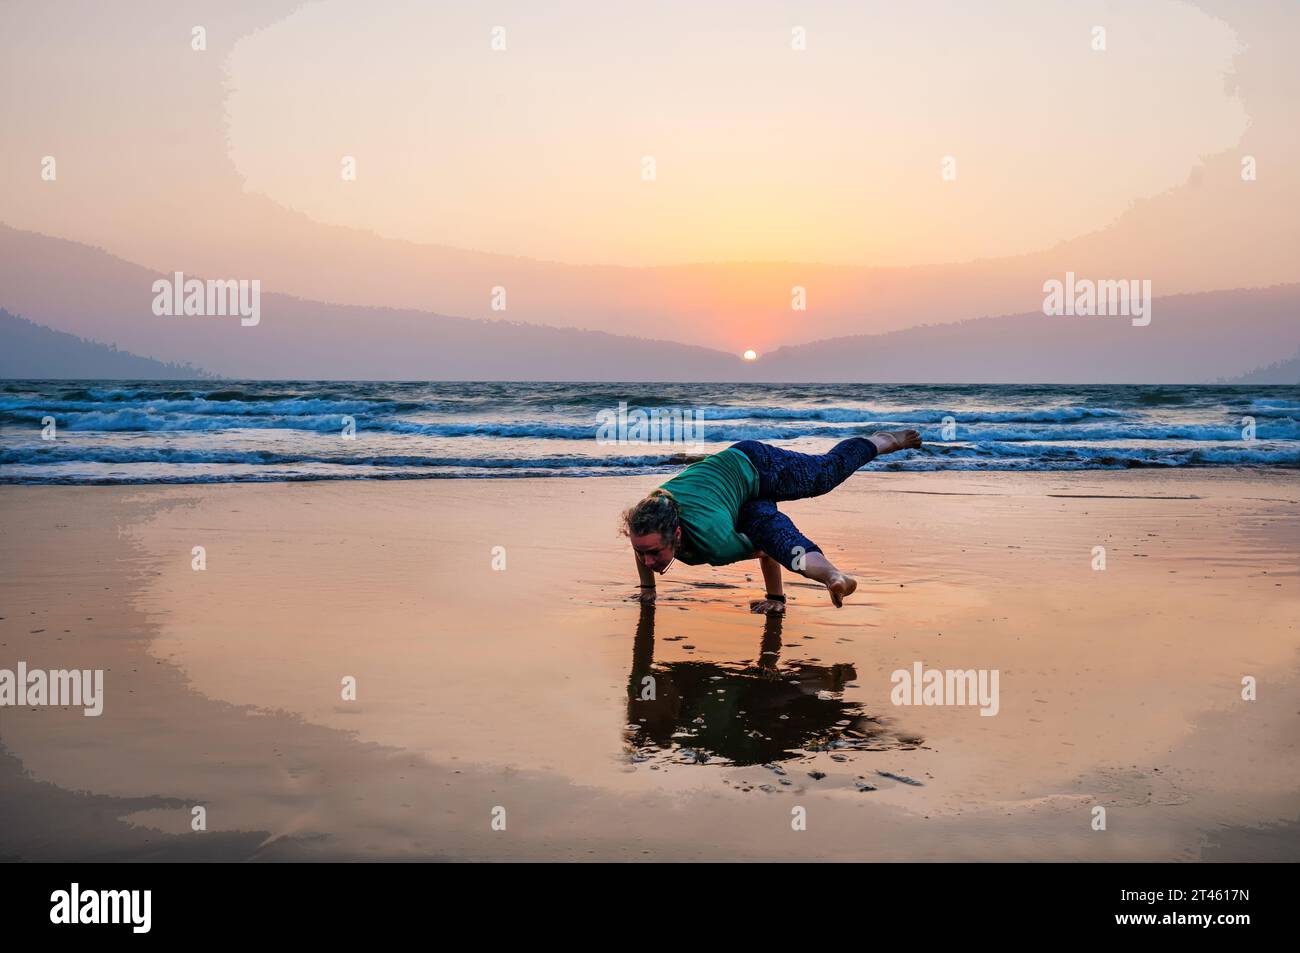 02-21-2019 Goa, IndiaYoga teacher  stands  in a pose (asana)   on 2 hands  and leg to the side on the beach in Goa Stock Photo